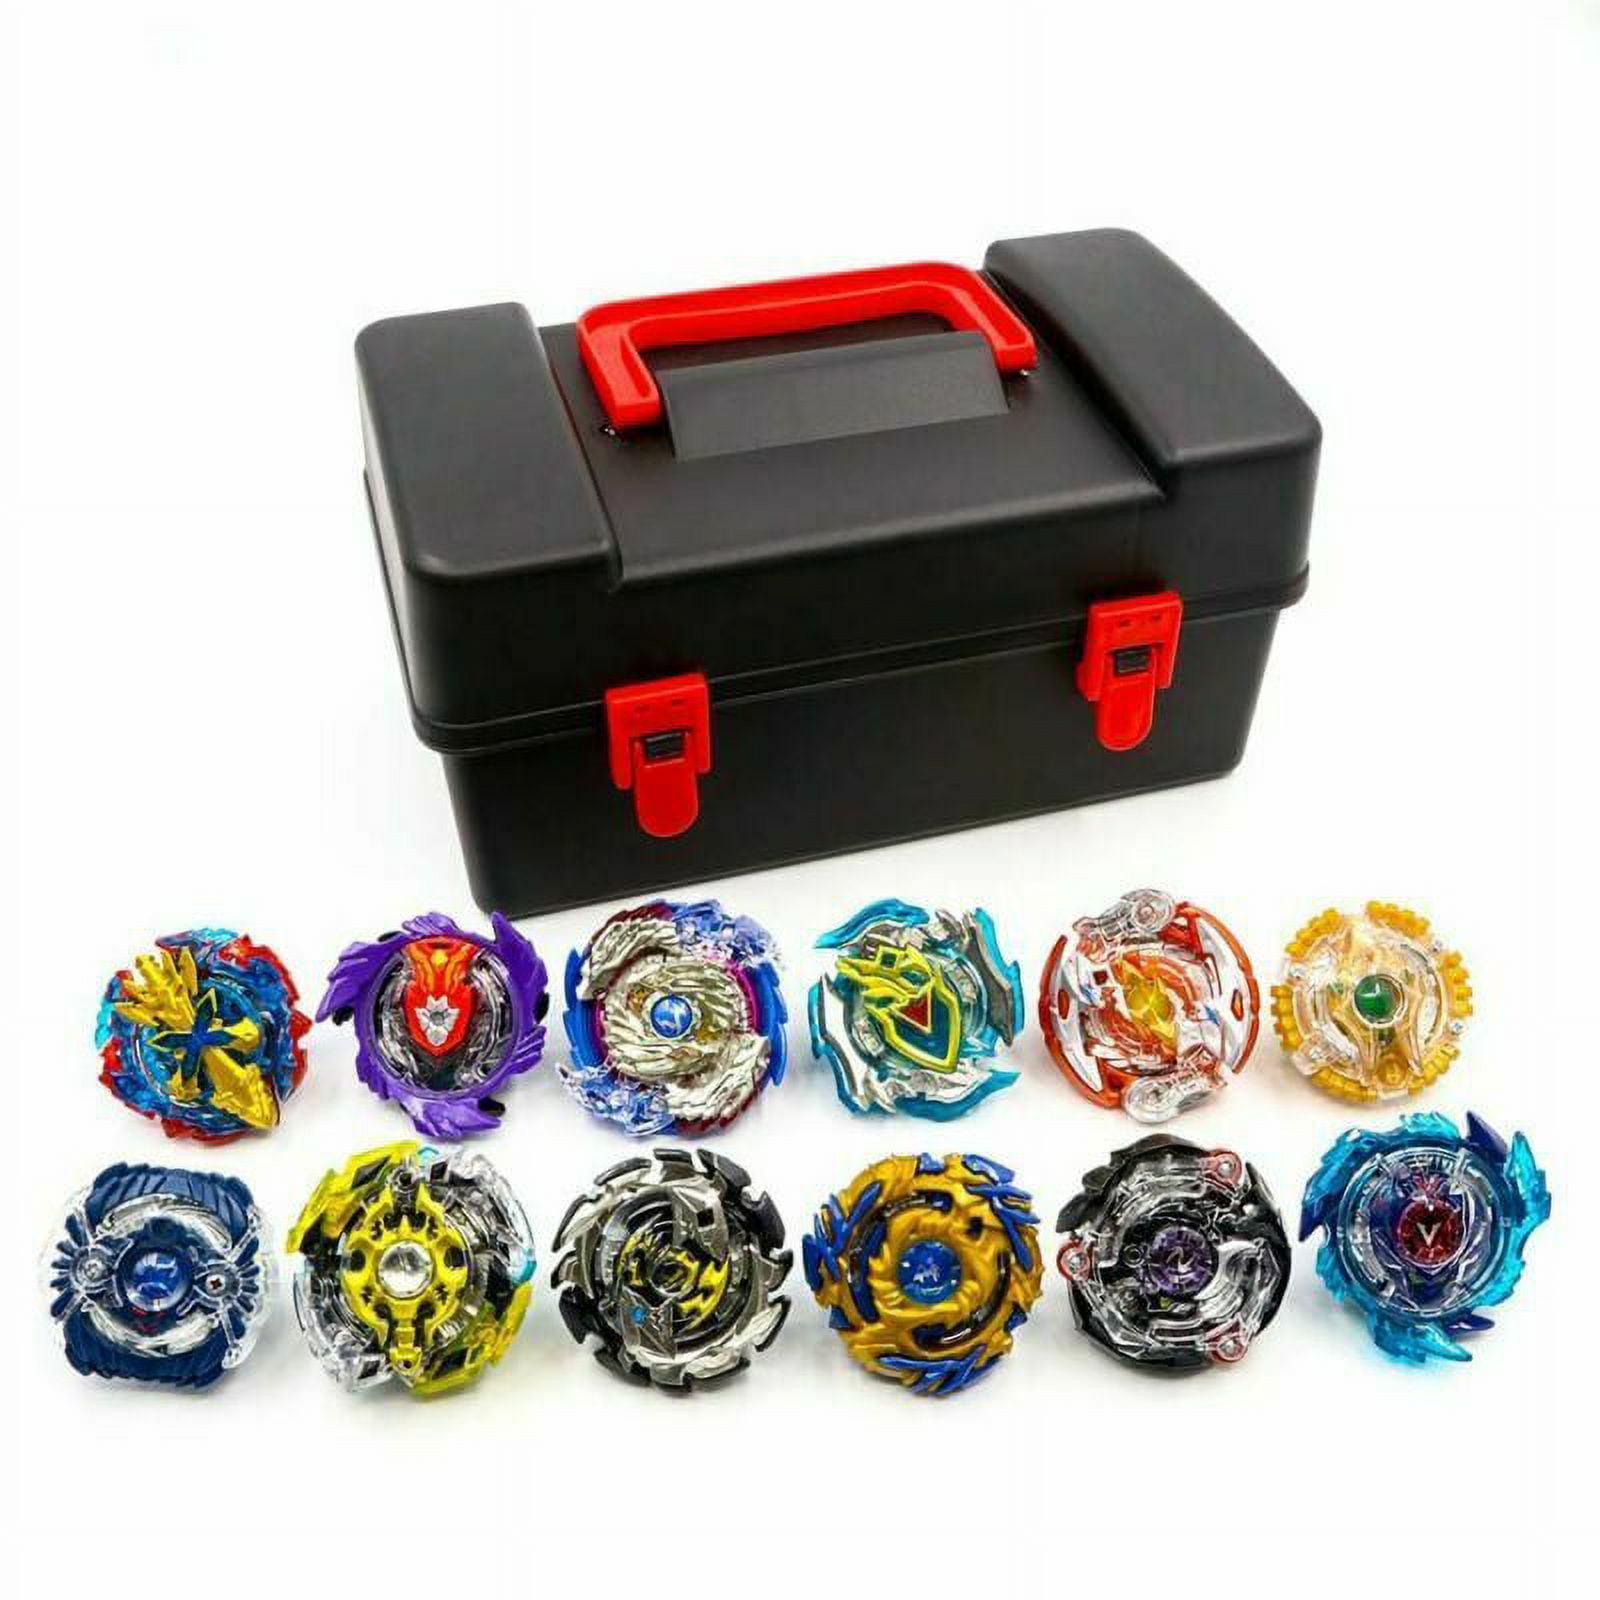 OPENING 10 TURBO BOXES IN BEYBLADE BURST RIVALS! 